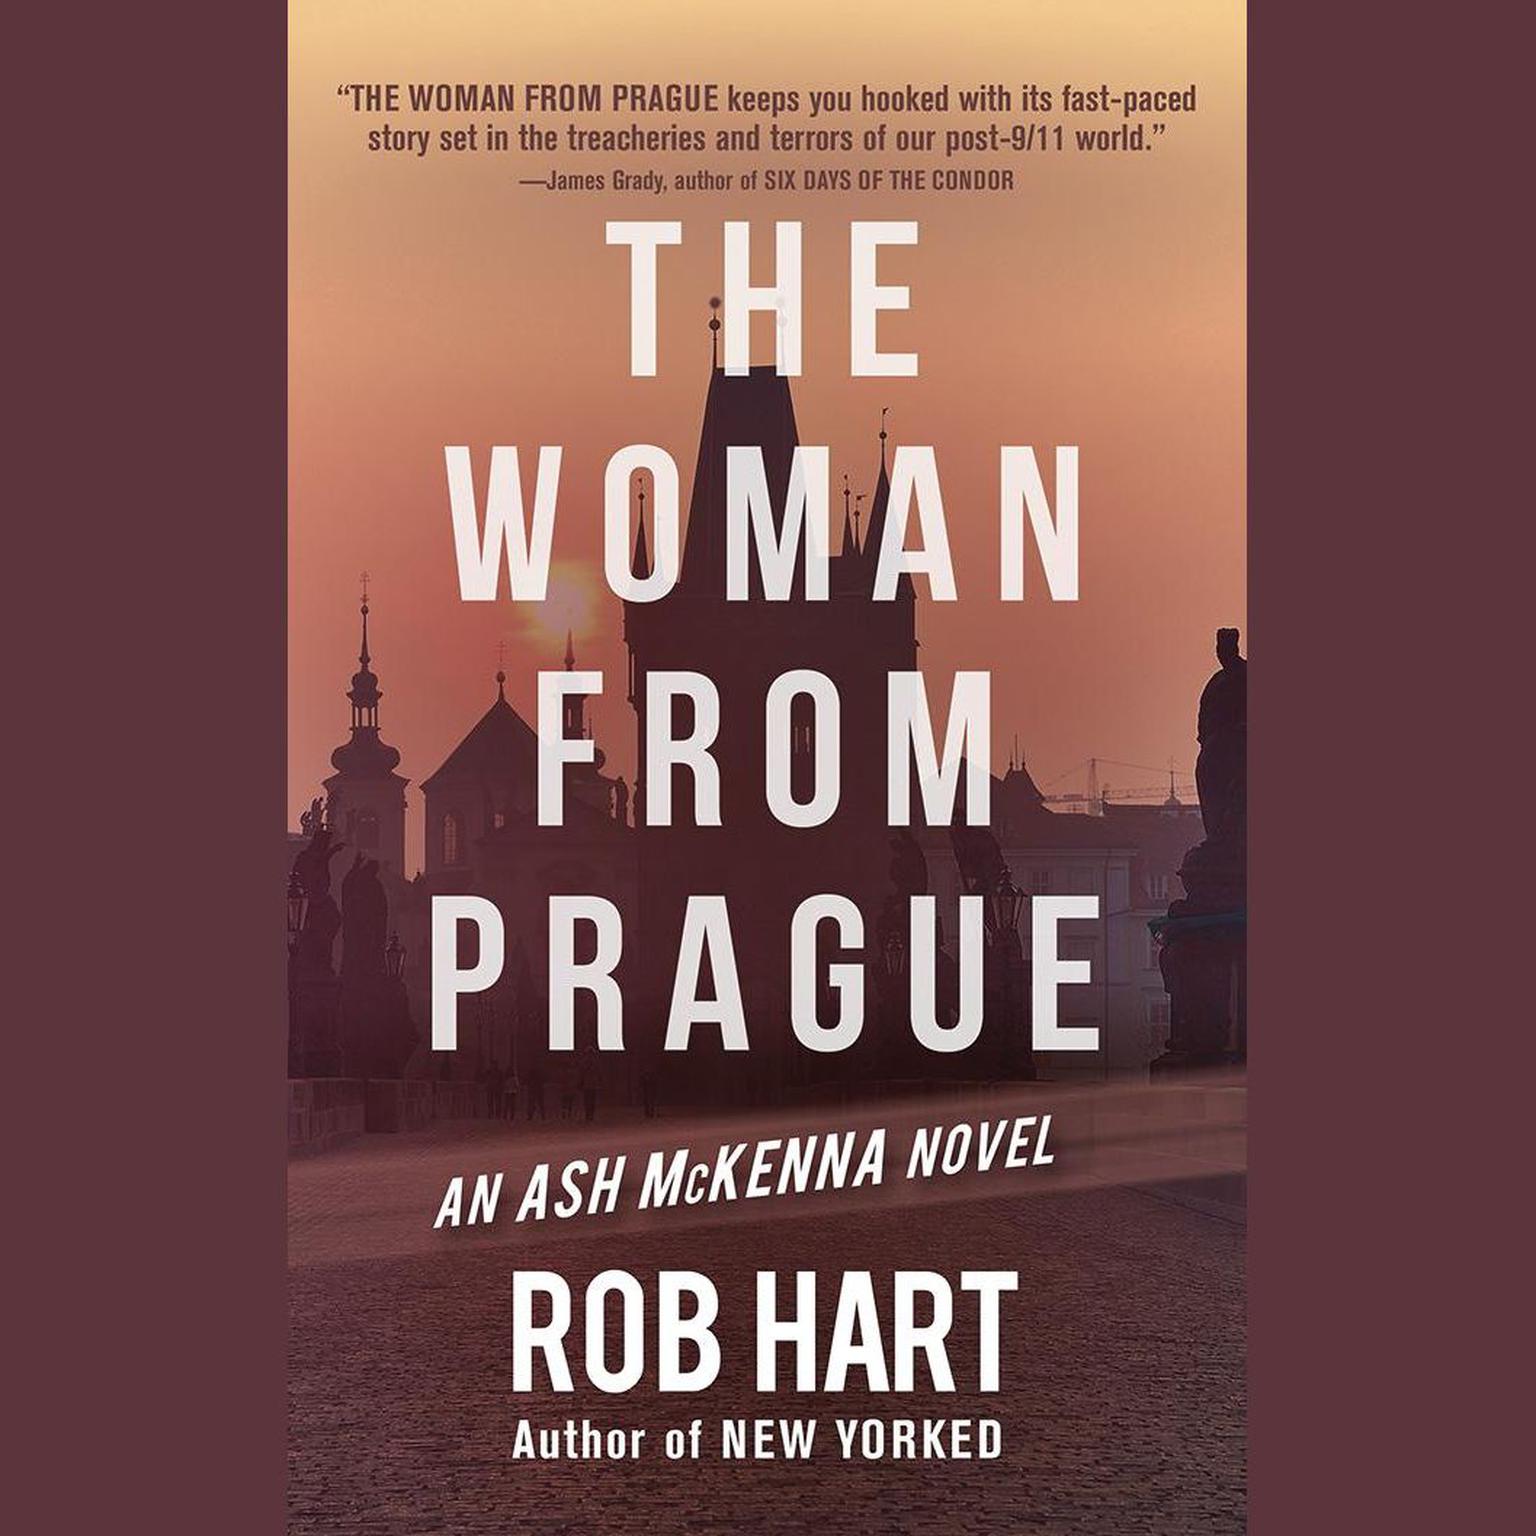 The Woman from Prague Audiobook, by Rob Hart